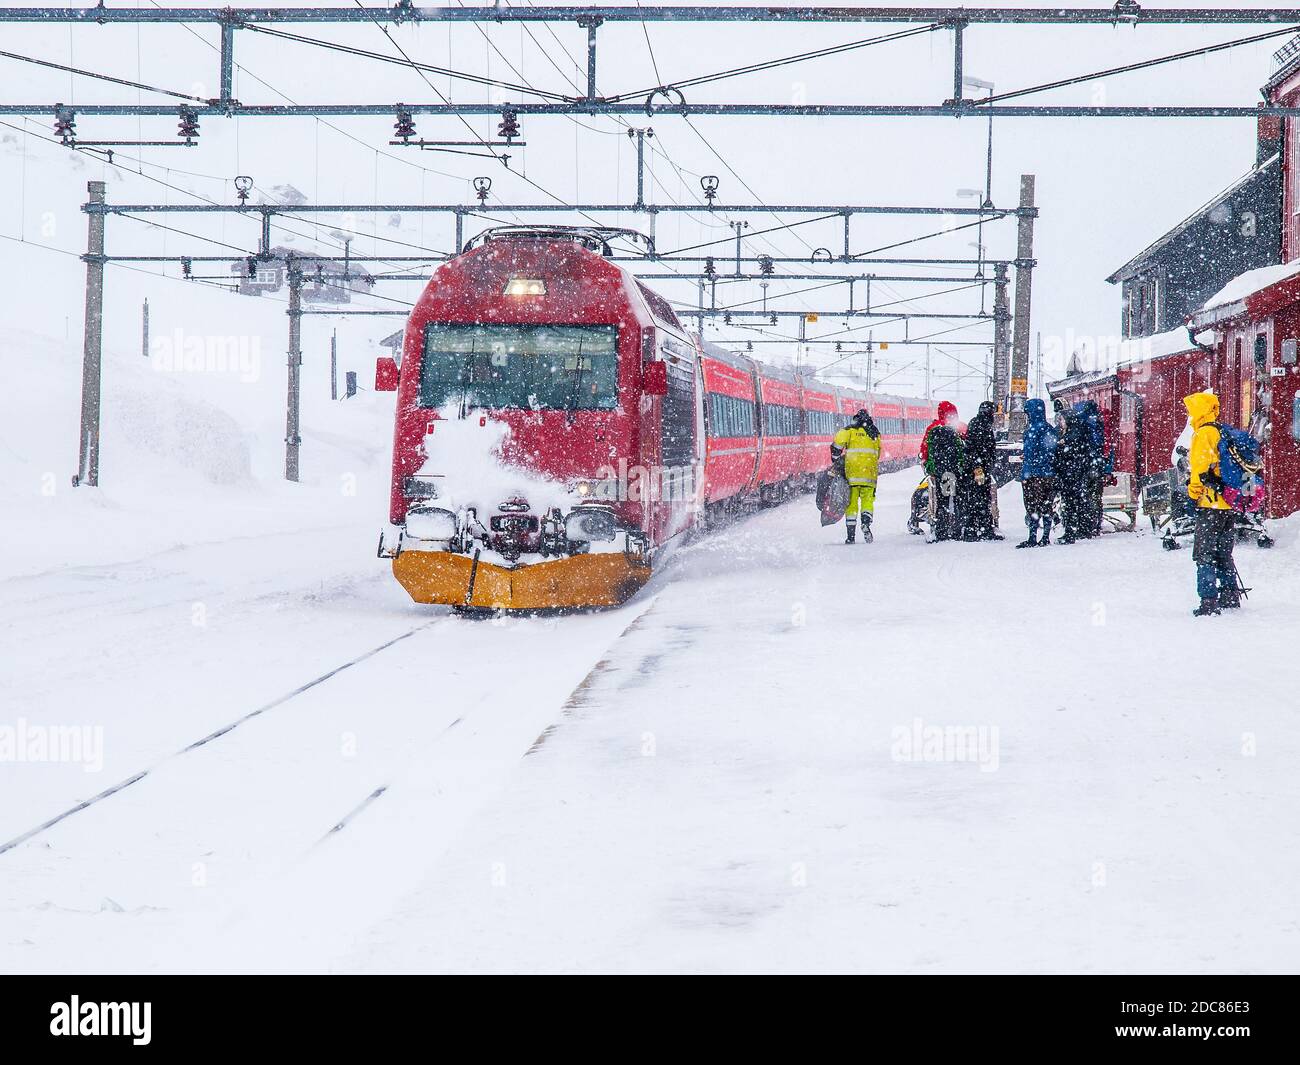 A train at Finse in winter. Finse is a railway station and small village on the Oslo to Bergen railway line. Norway Stock Photo